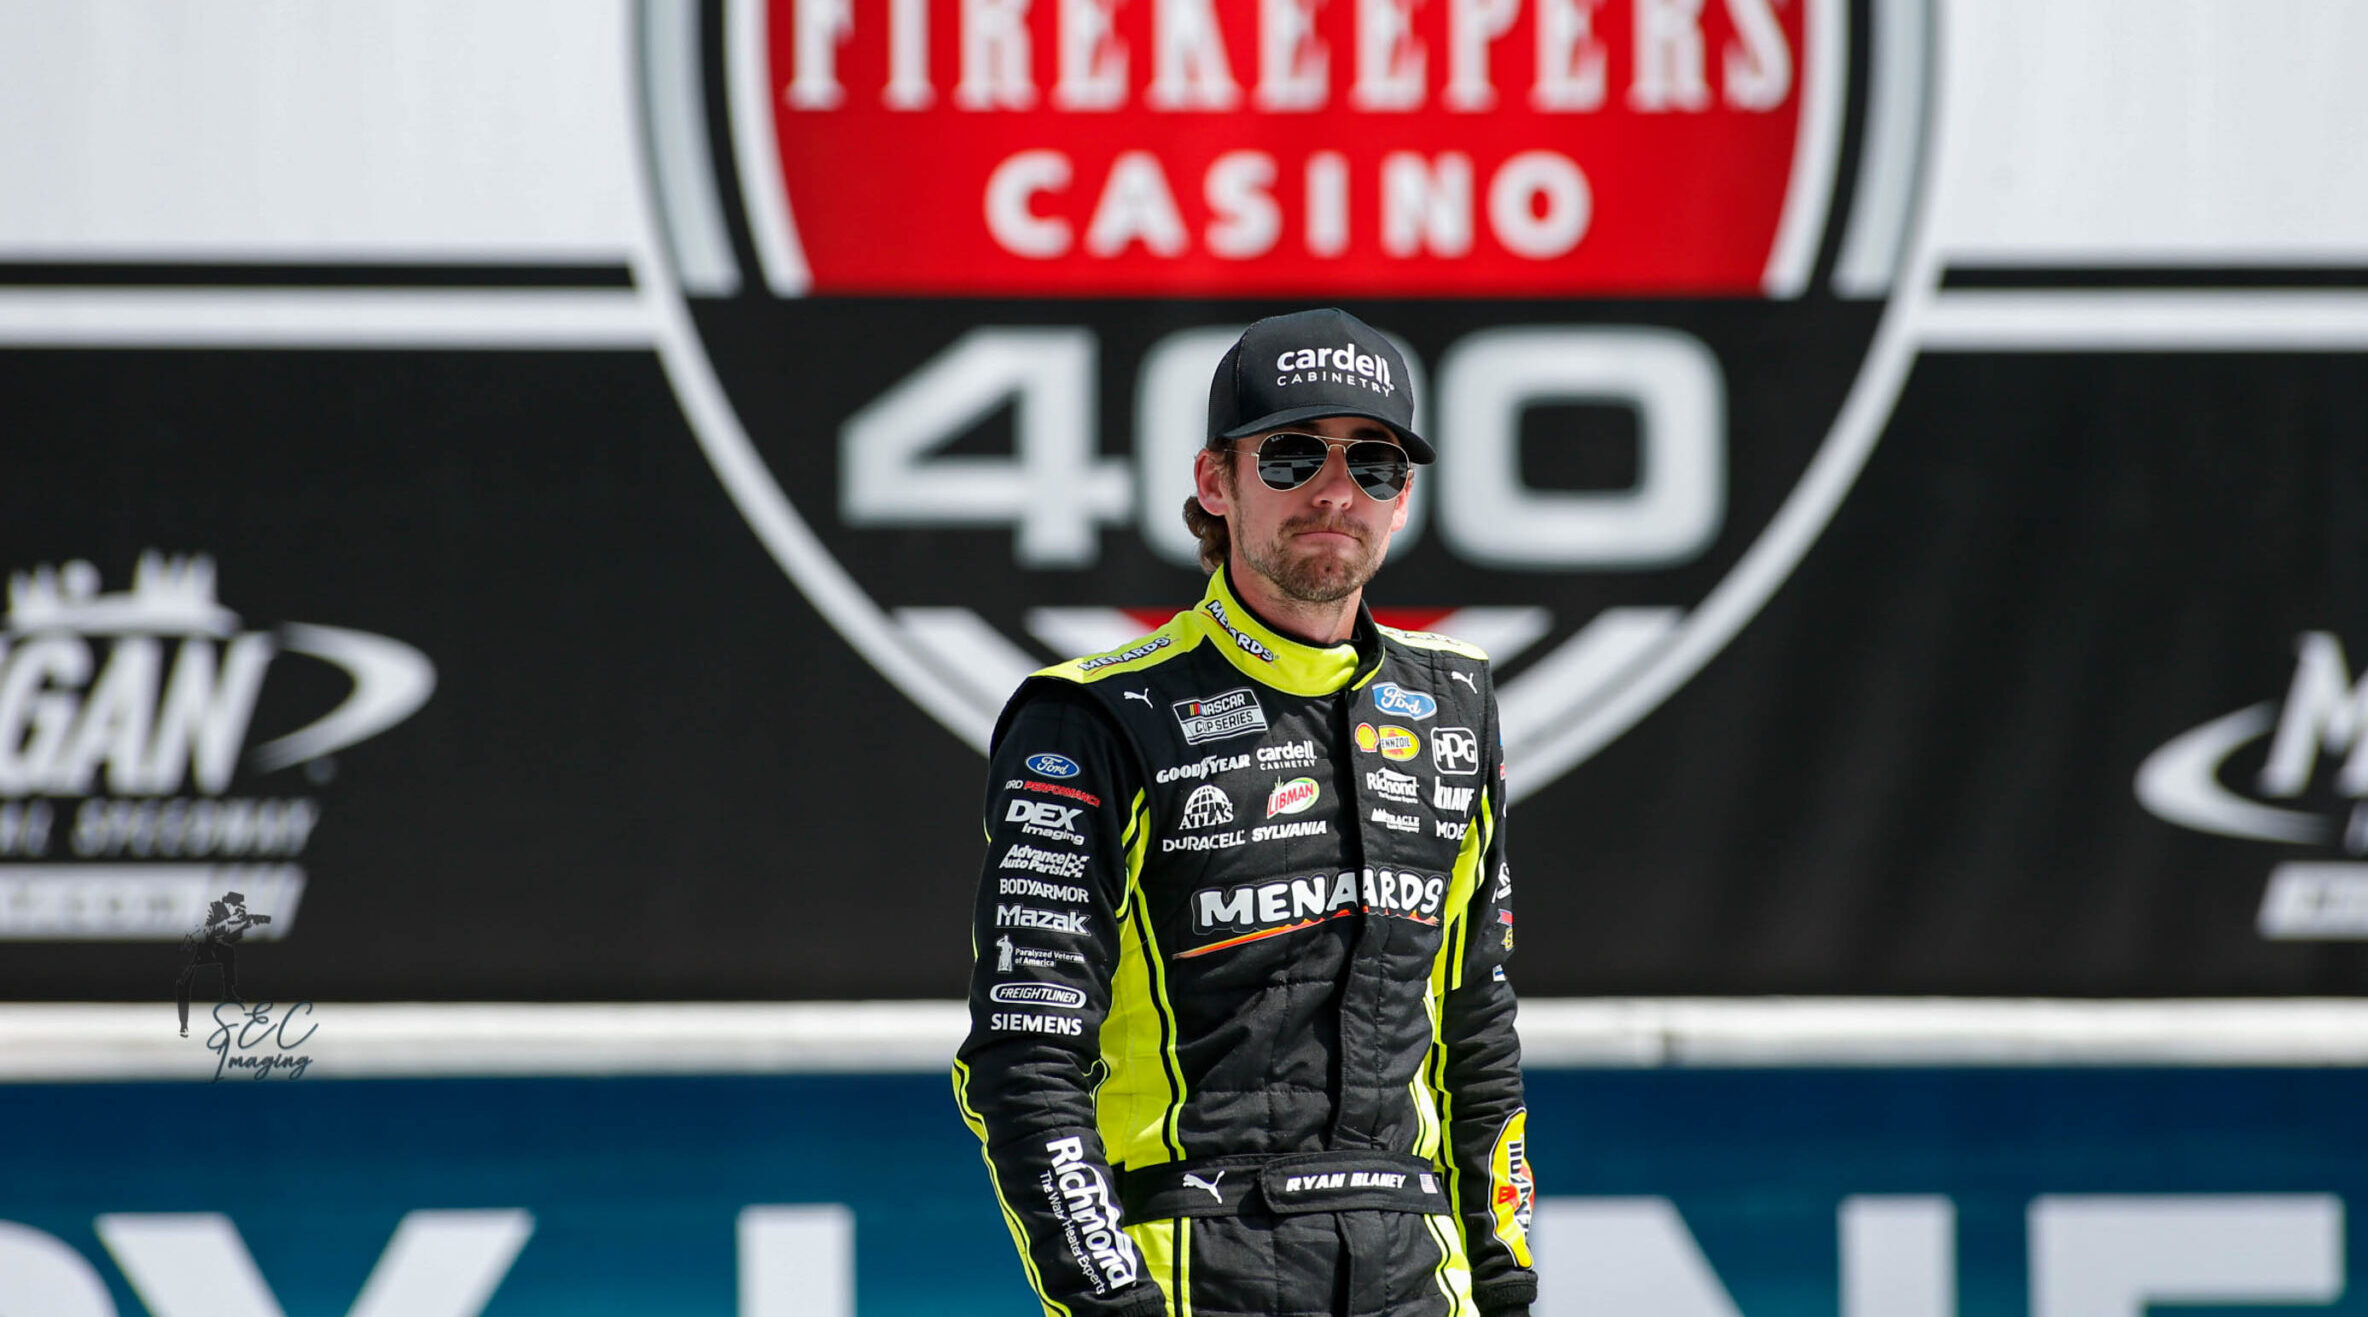 All in all, Ryan Blaney appreciates his opportunities in the NASCAR Cup Series as a competitive, proven winner. (Photo: Stephen Conley | The Podium Finish)